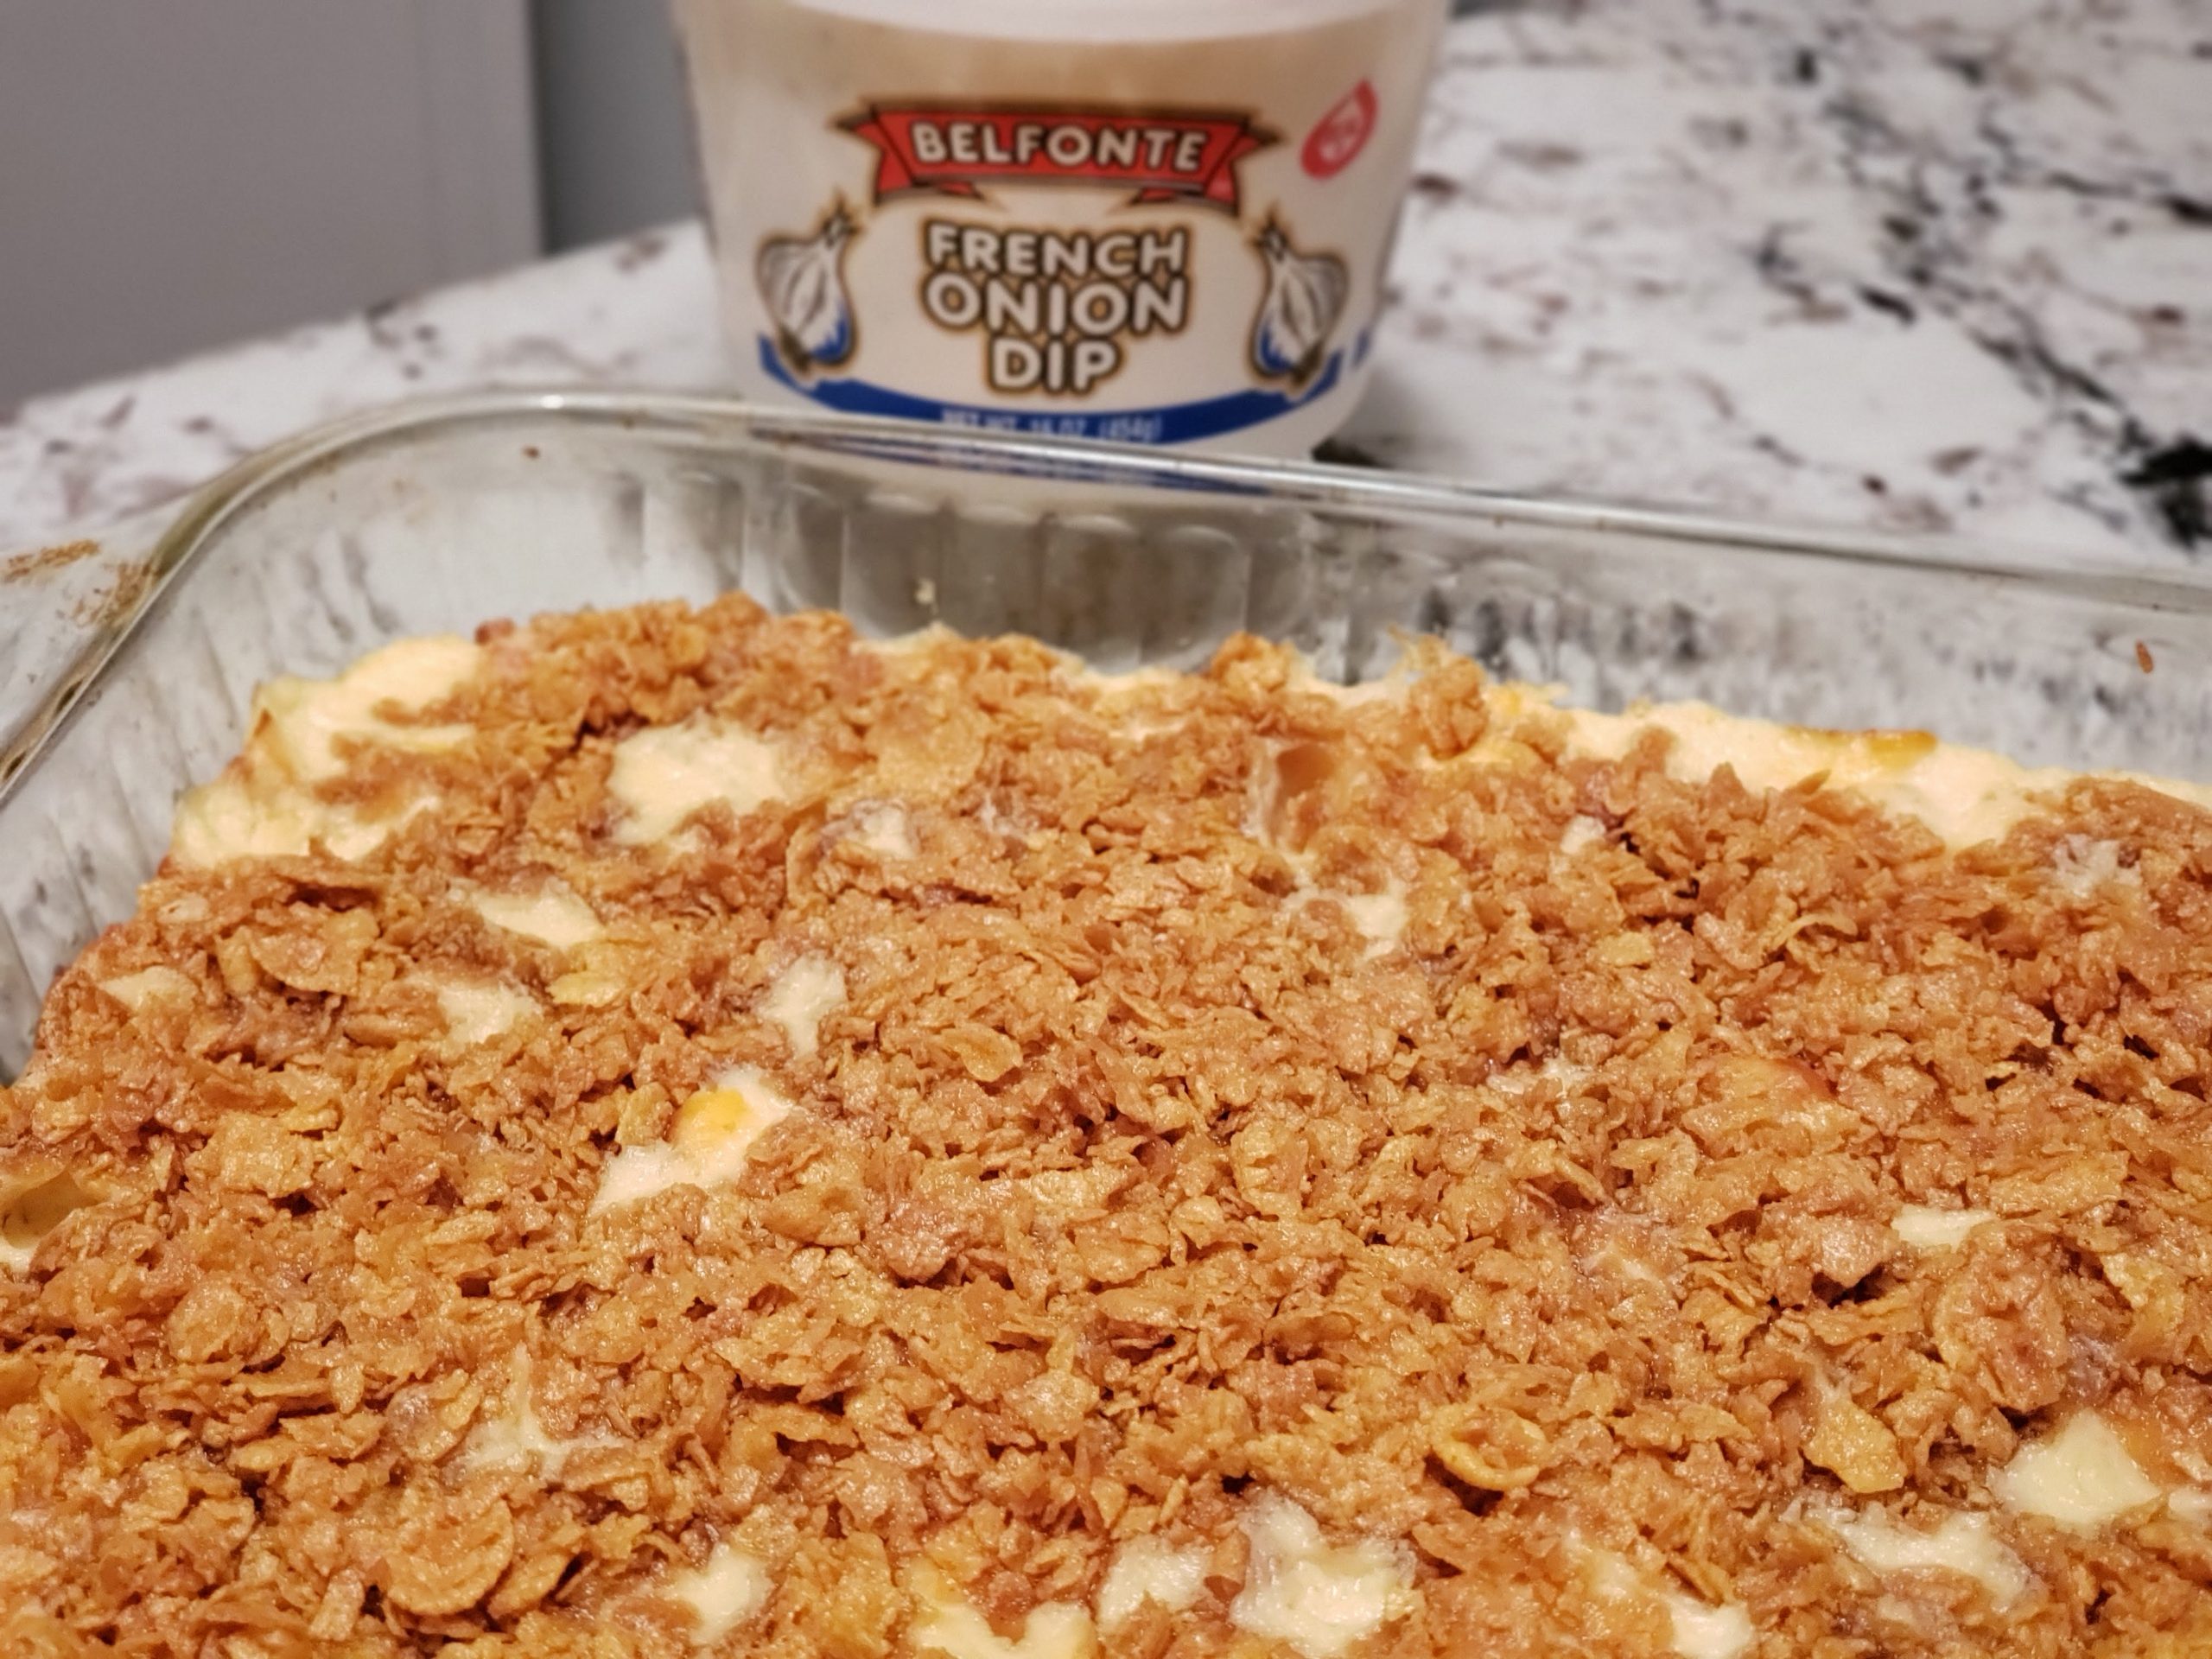 Hashbrown Casserole with French Onion Dip